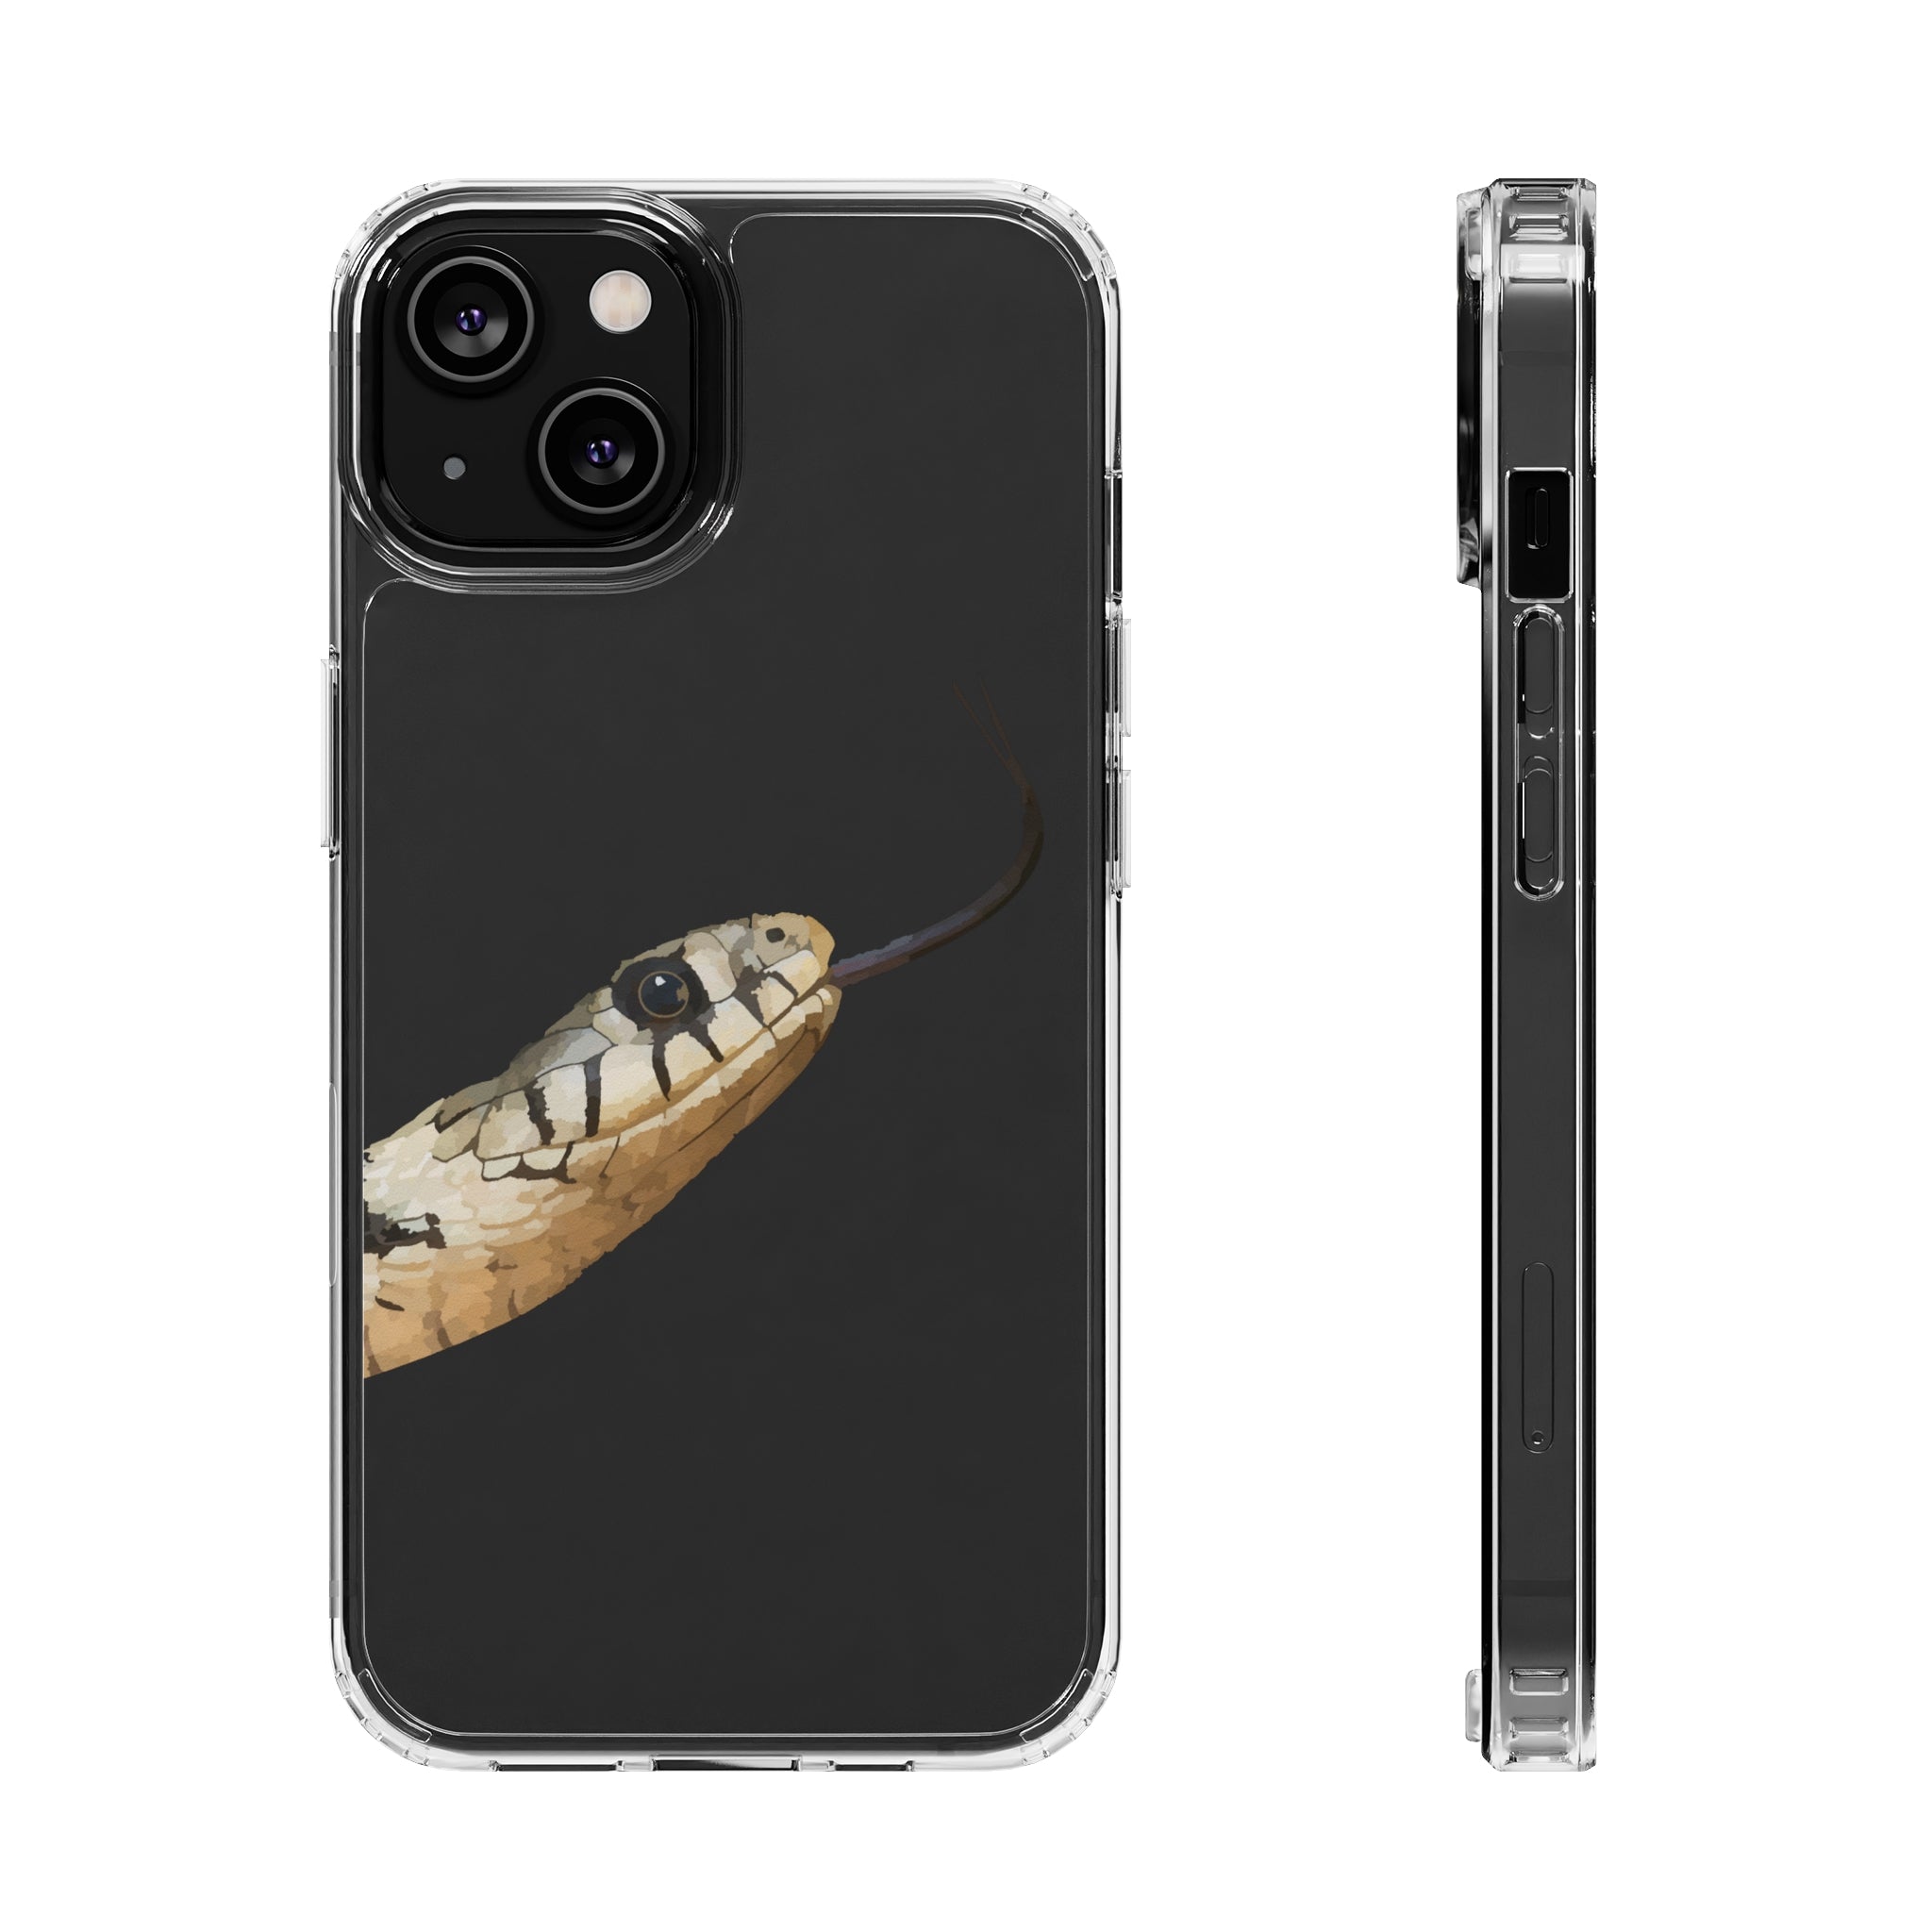 Main image of Lurking Snake Head iPhone Case